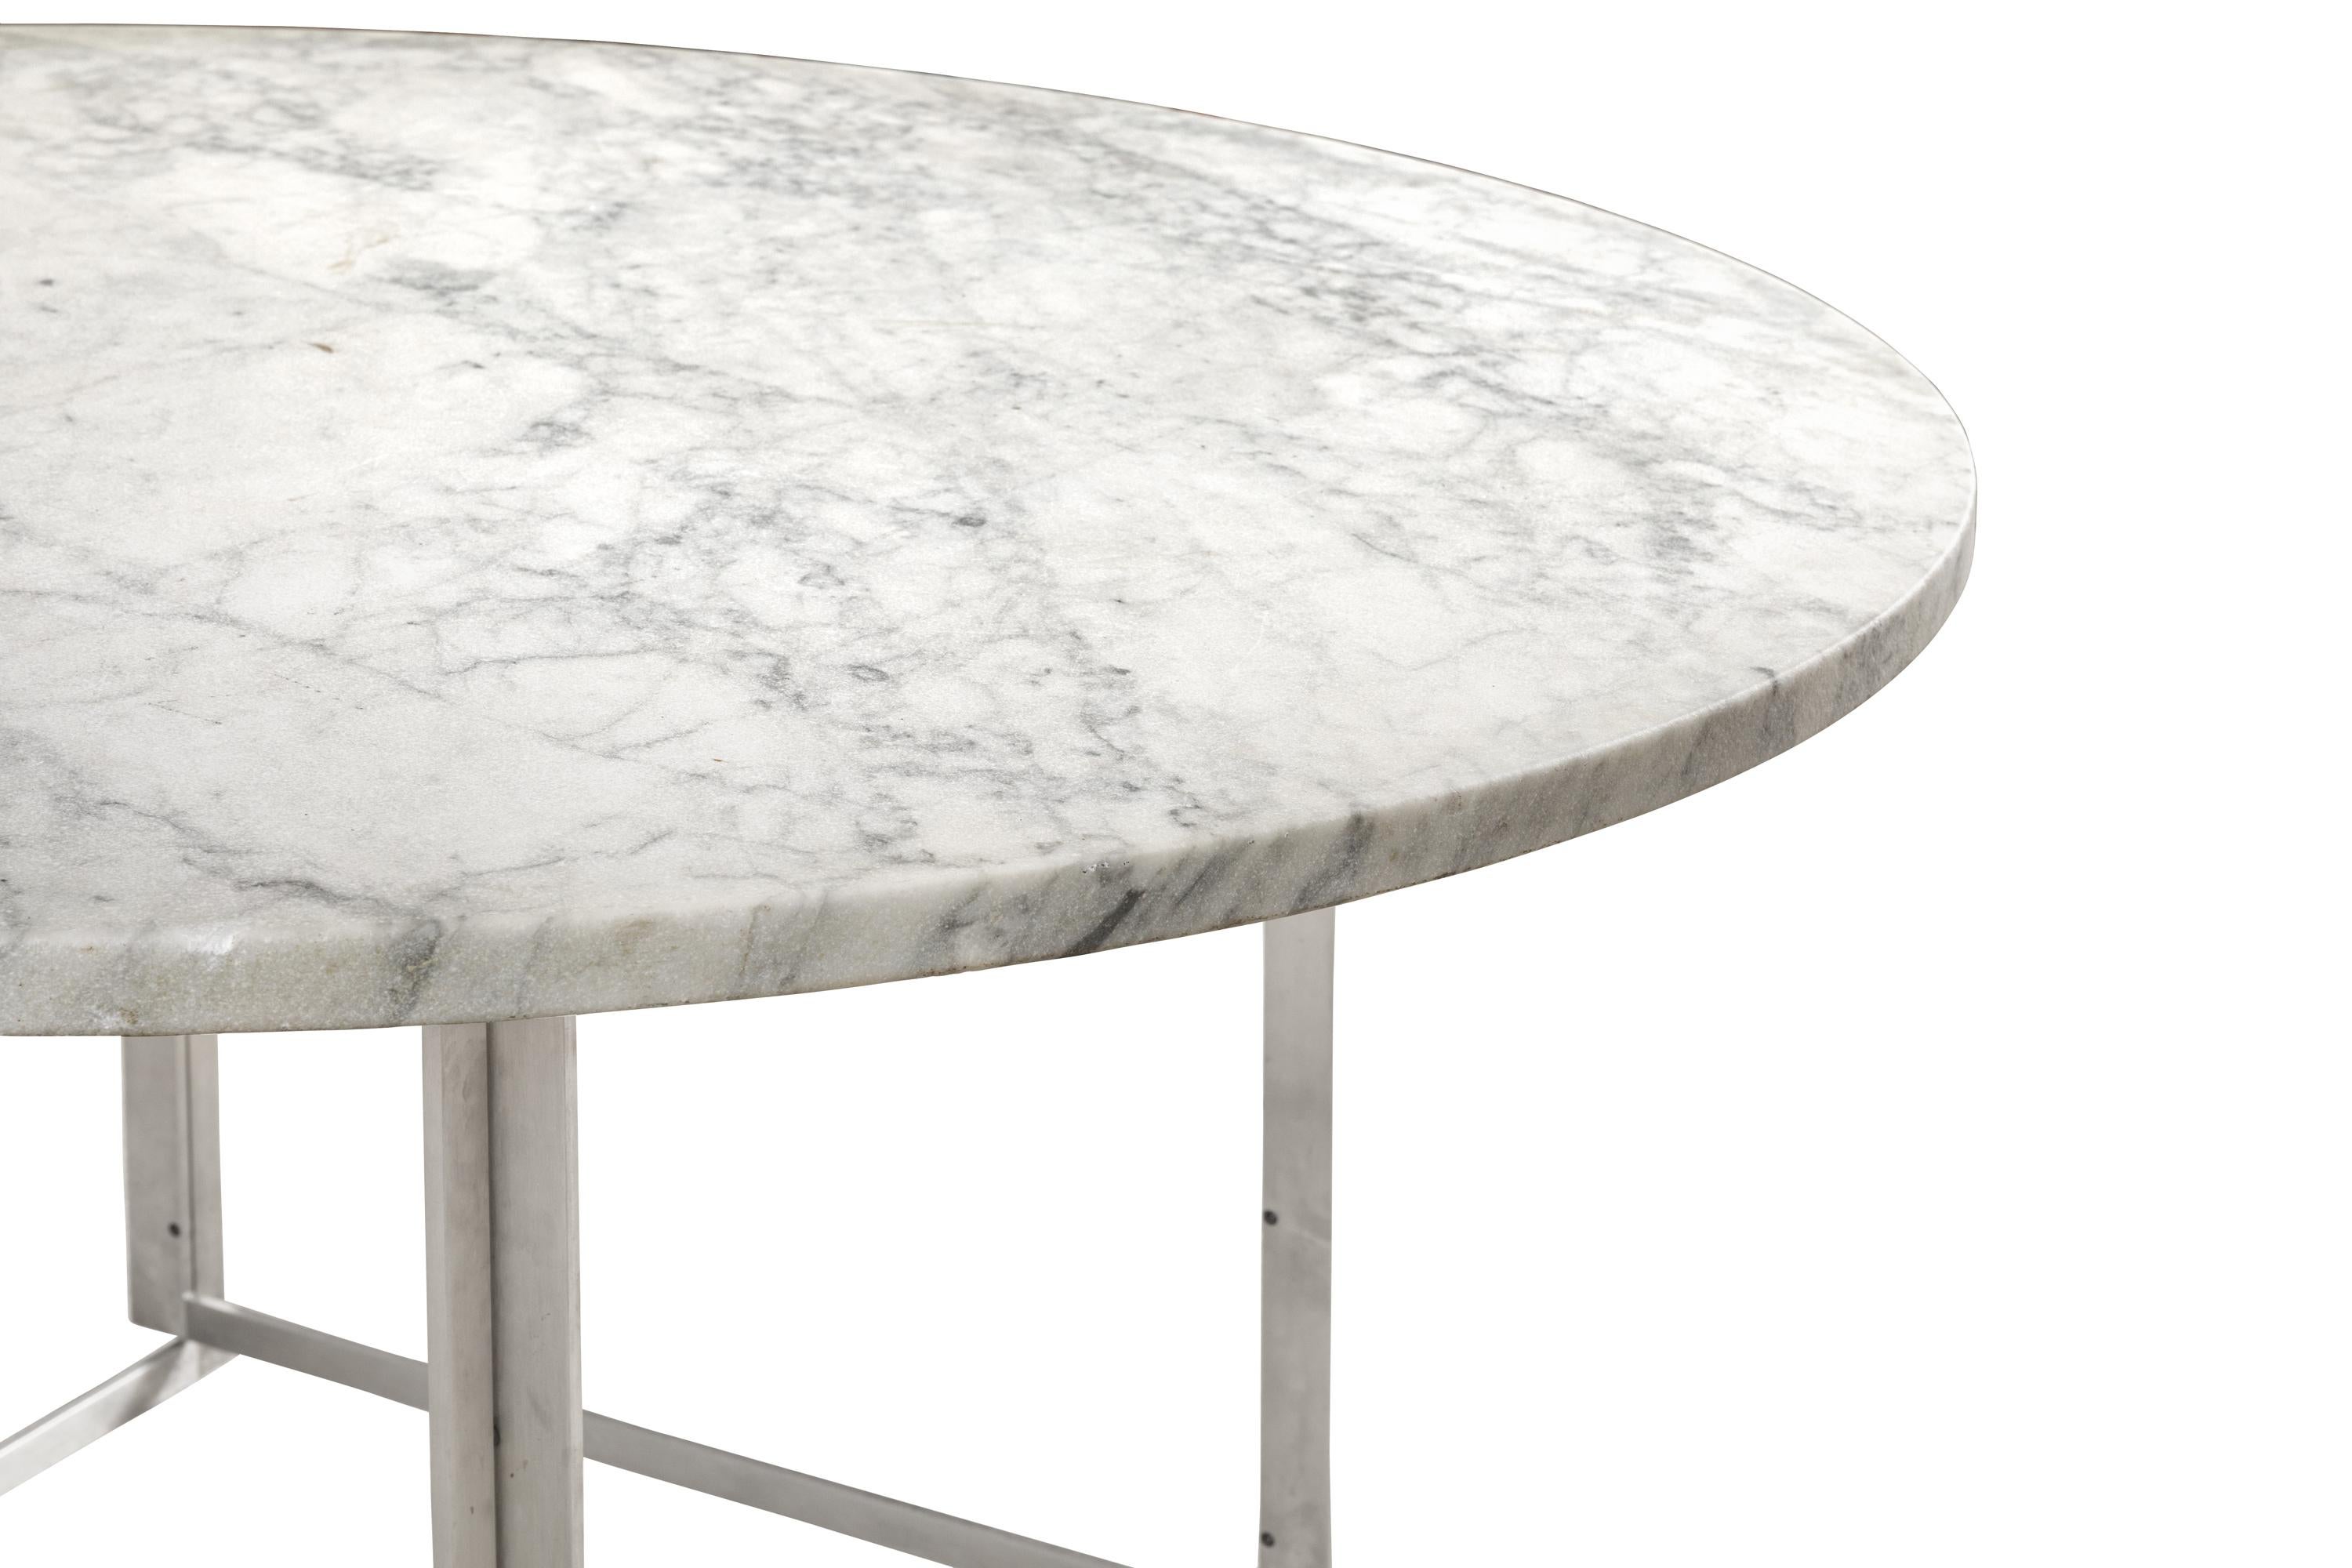 Steel Poul Kjaerholm PK 54 Marble Dining Table with Maple Extensions for Fritz Hansen